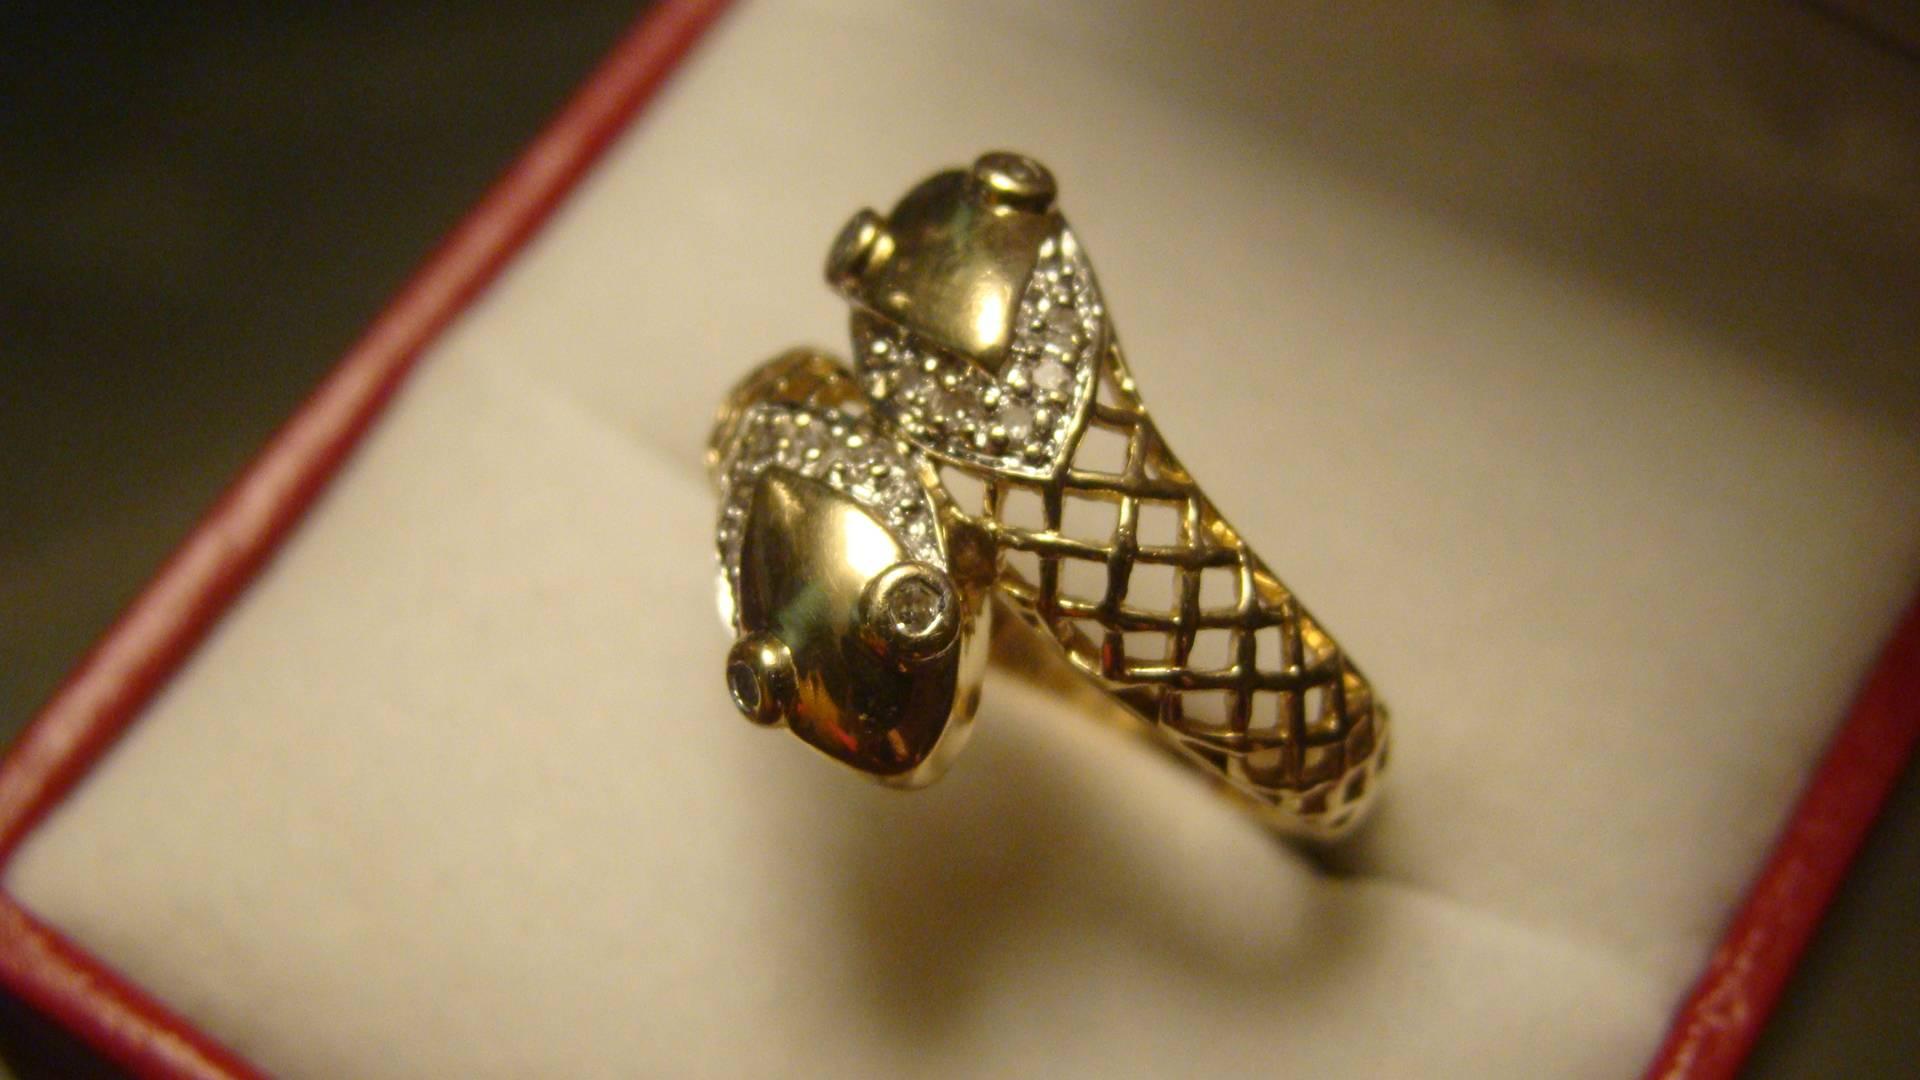 Unknown Antique Gold Double Head Snake Ring with Diamond Eyes